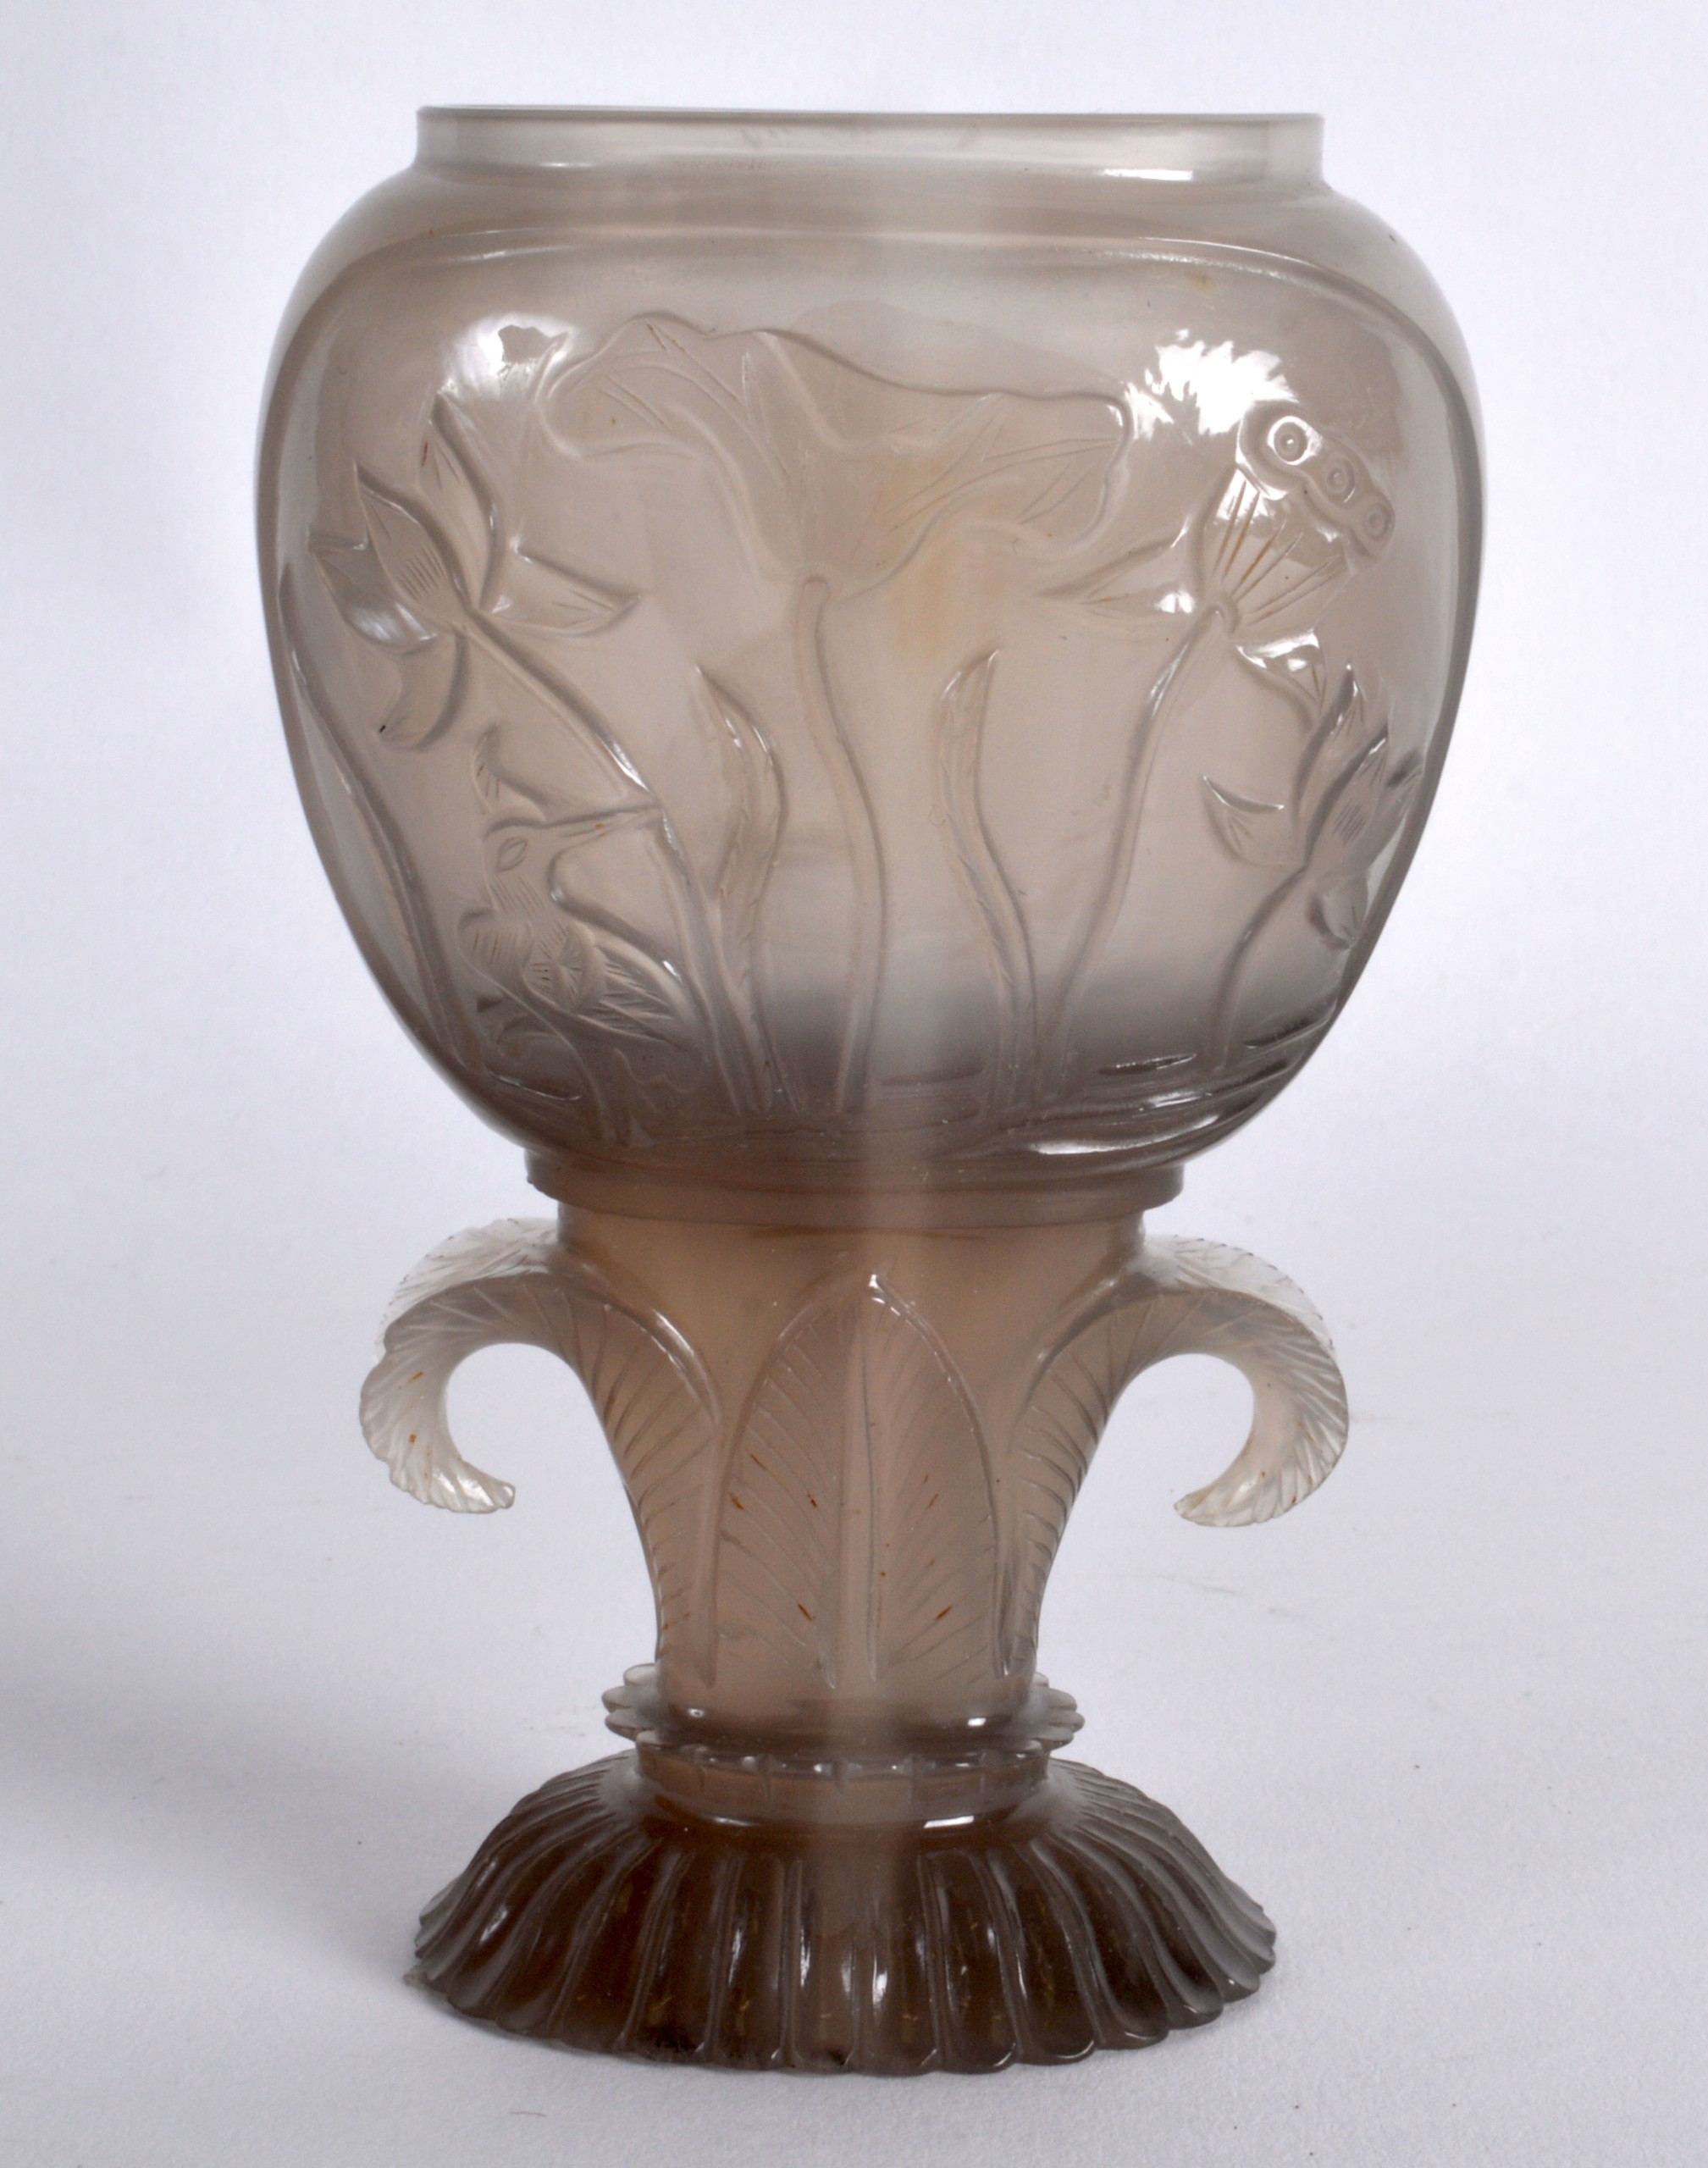 A CHINESE QING DYNASTY MUGHAL STYLE AGATE VASE decorated with animals and flowers, upon a